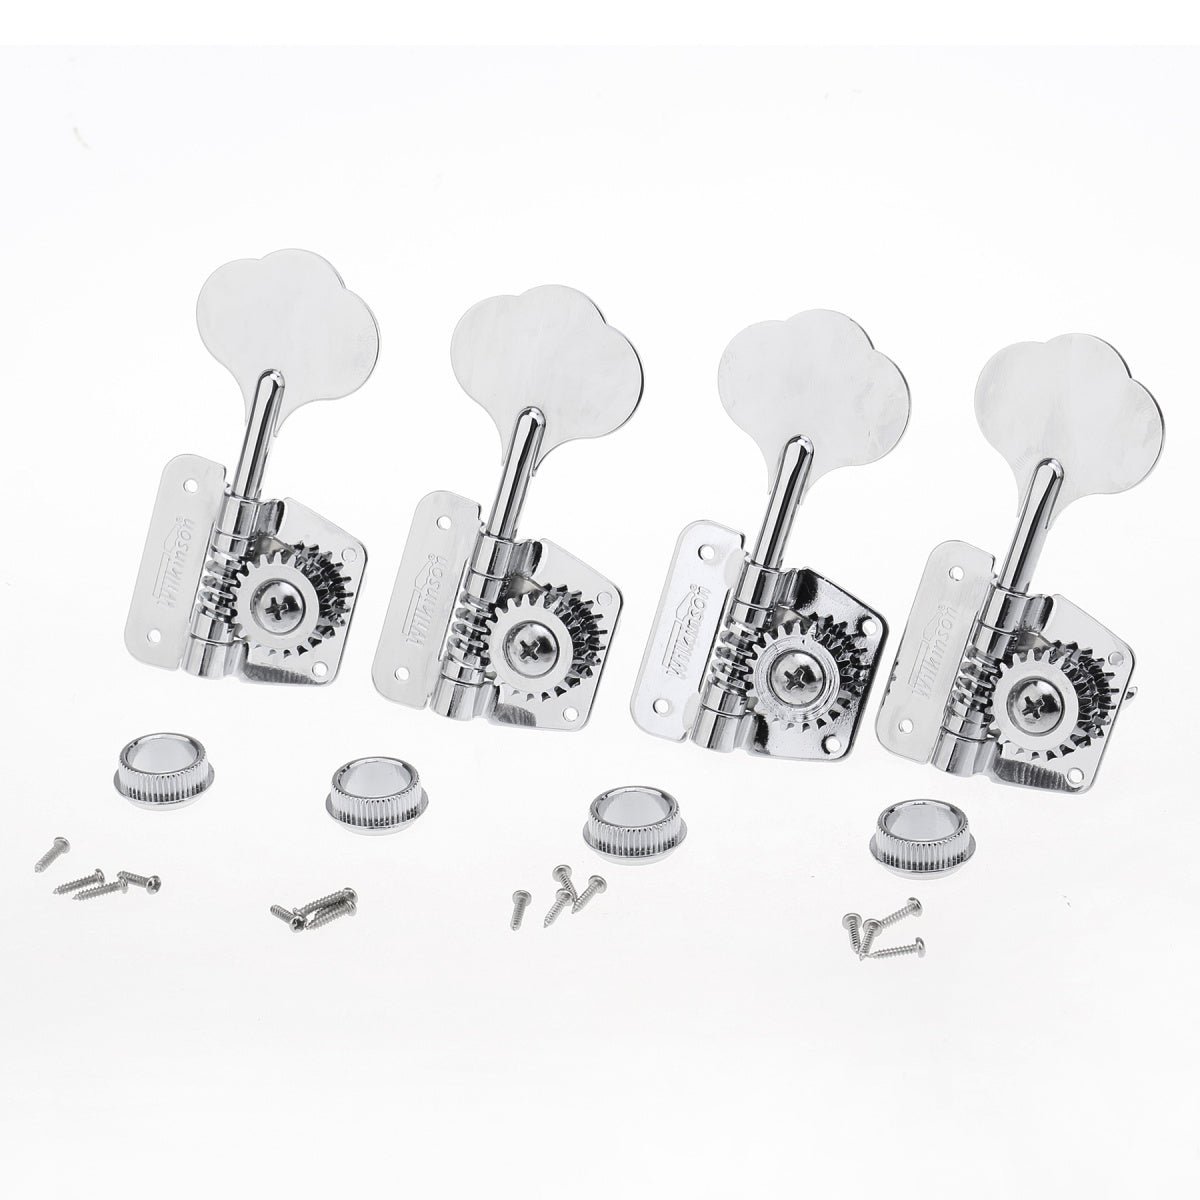 Wilkinson 4-In-Line 70s Vintage Style Bass Tuners Tuning Pegs Keys Machine Heads Set for Precision Jazz Bass, Chrome